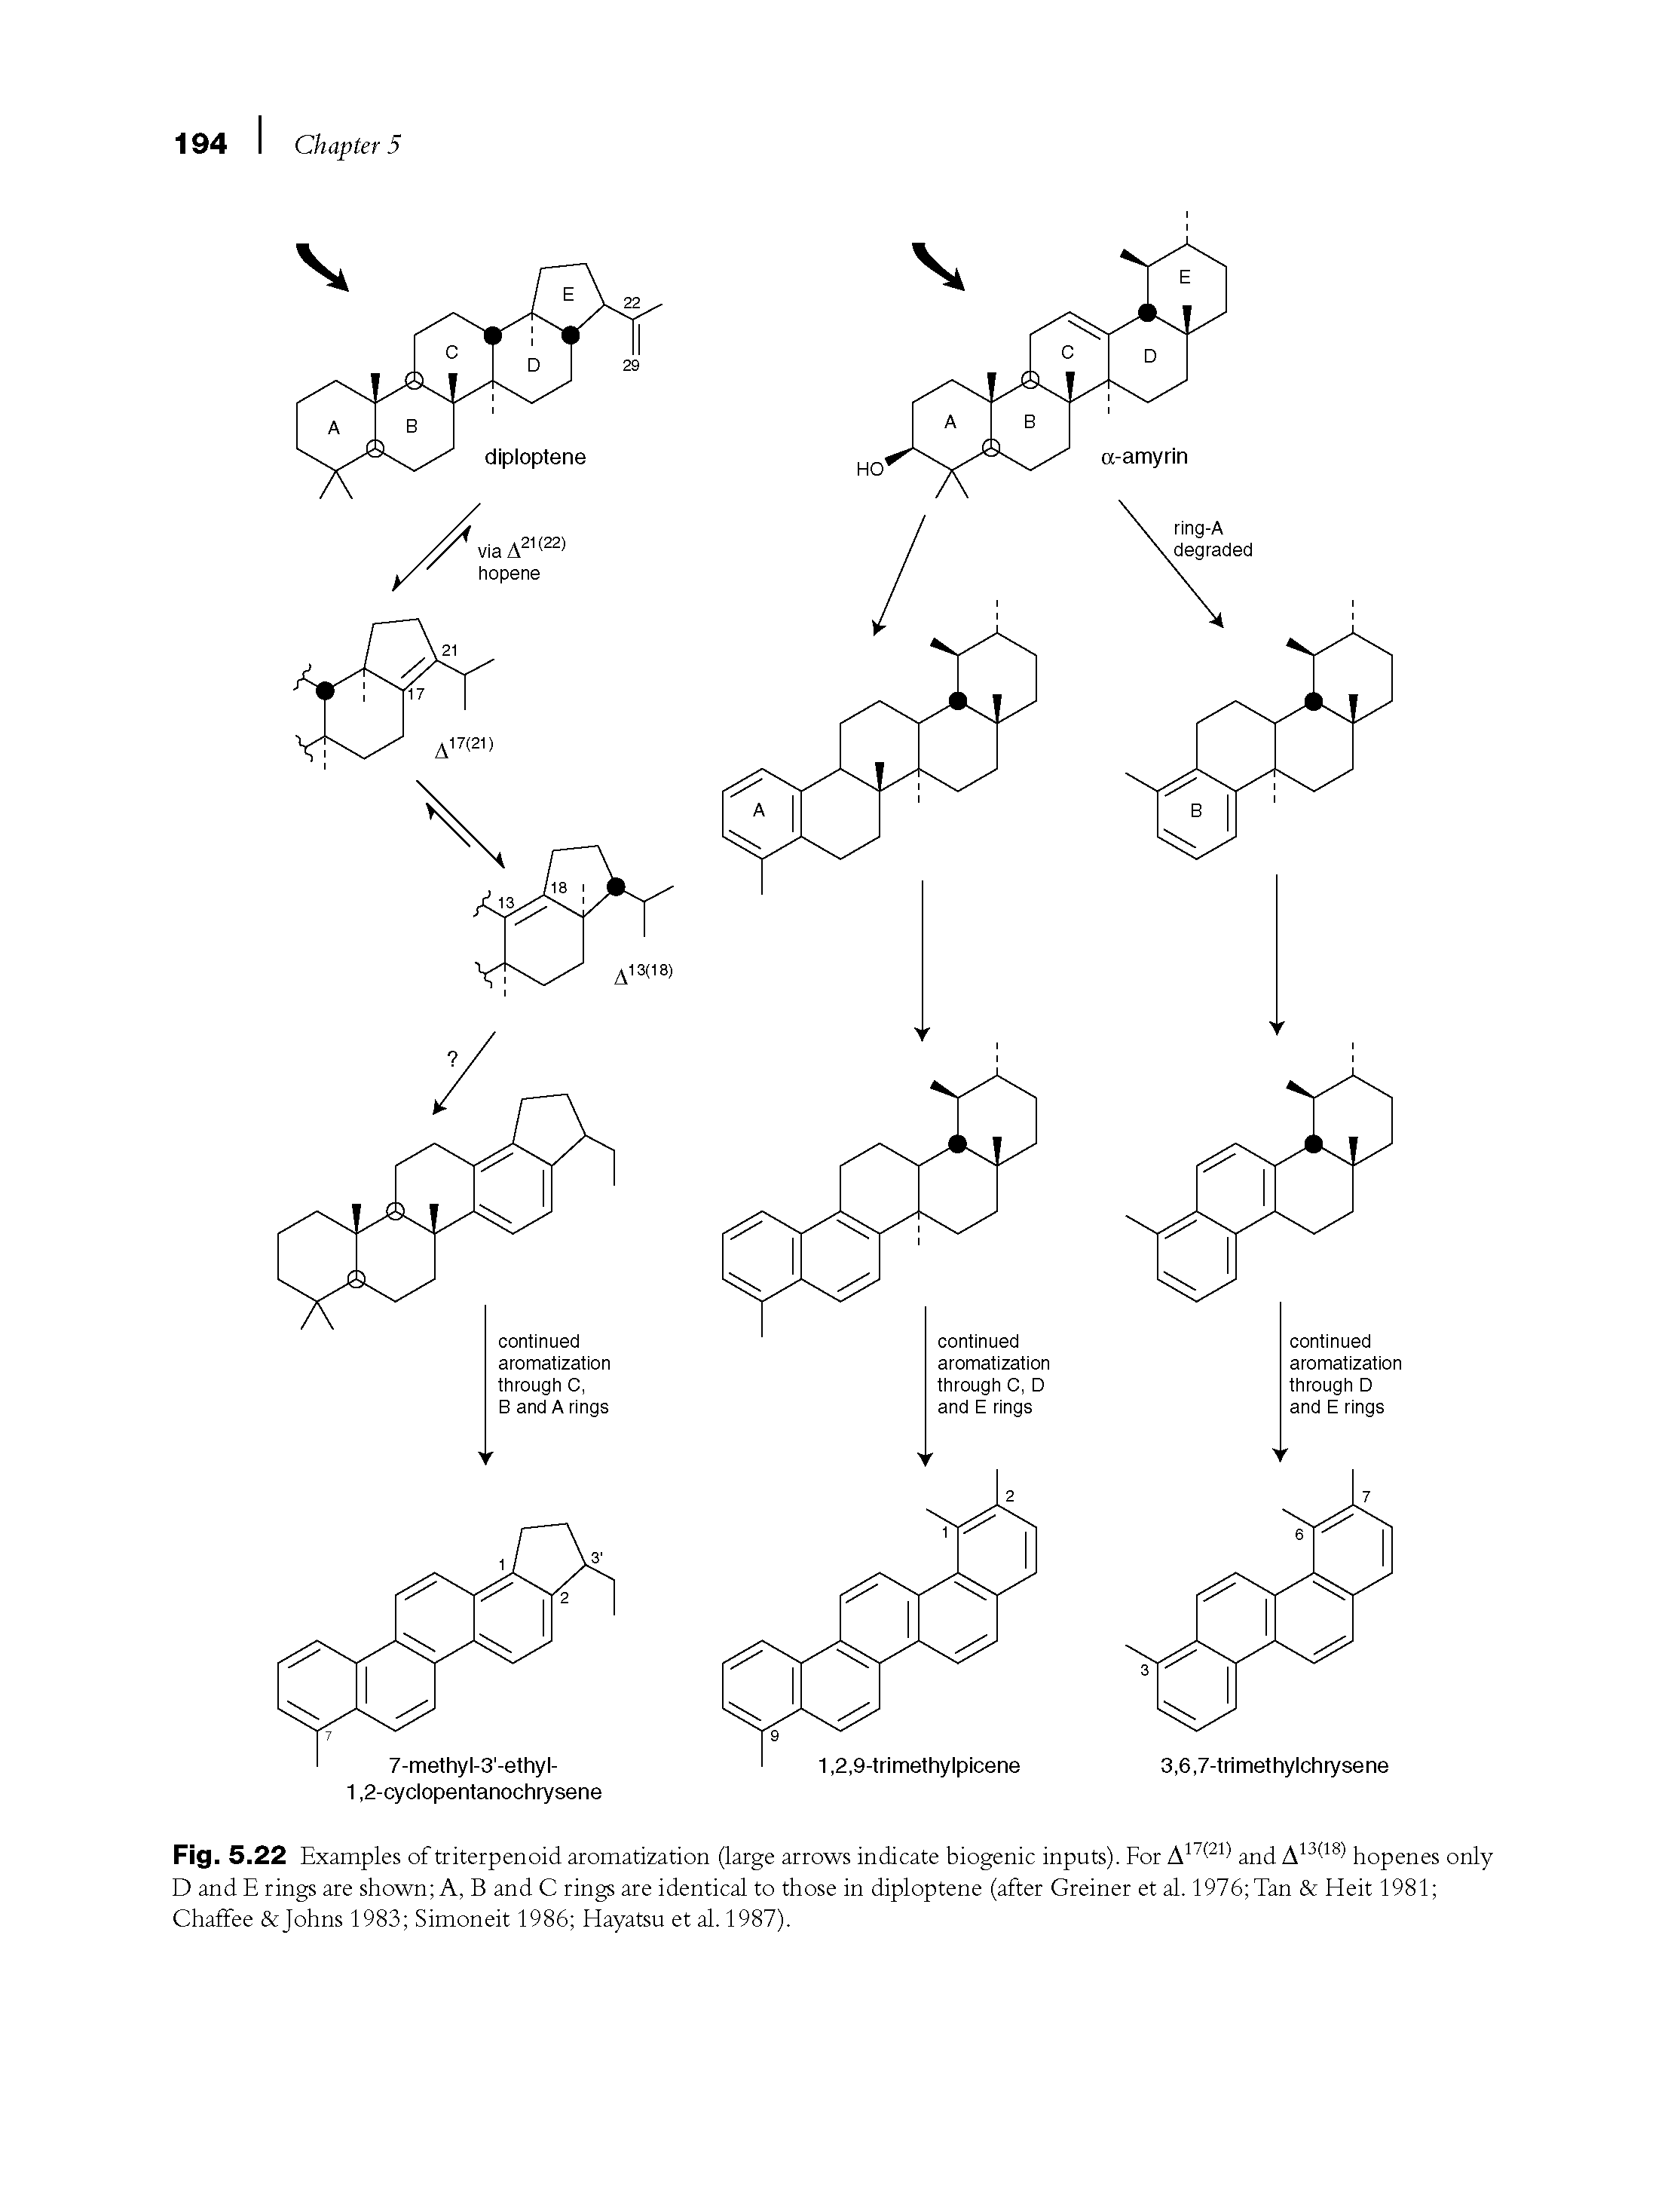 Fig. 5.22 Examples of triterpenoid aromatization (large arrows indicate biogenic inputs). For A171 21- and A13( 18-) hopenes only D and E rings are shown A, B and C rings are identical to those in diploptene (after Greiner et al. 1976 Tan Heit 1981 Chaffee Johns 1983 Simoneit 1986 Hayatsu et al. 1987).